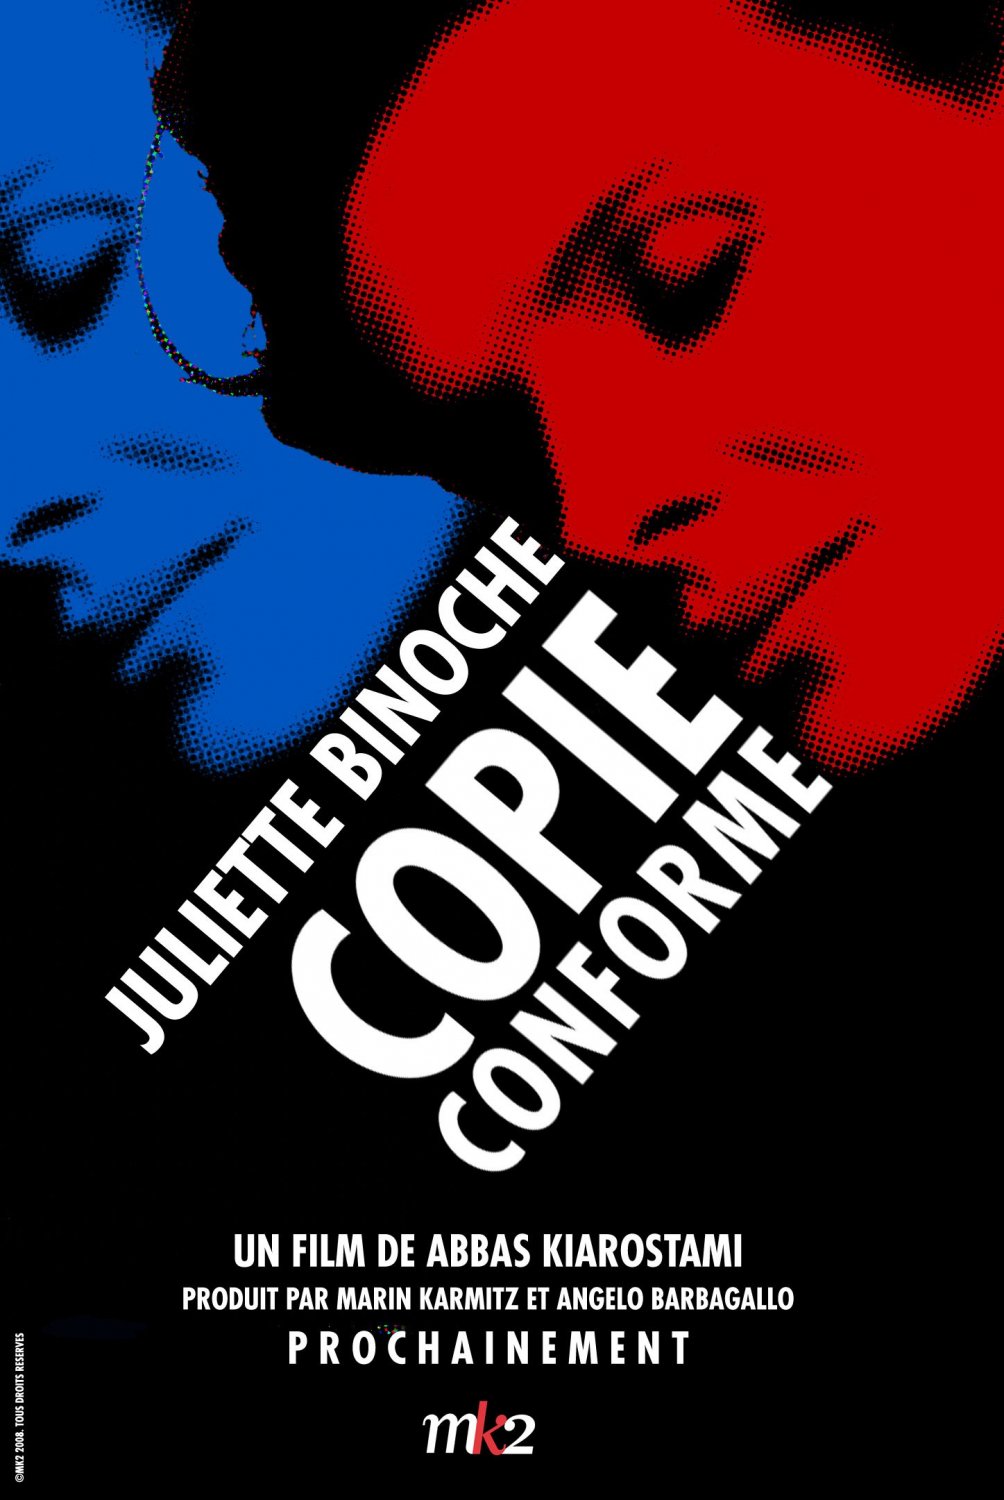 Extra Large Movie Poster Image for Copie conforme (#6 of 9)